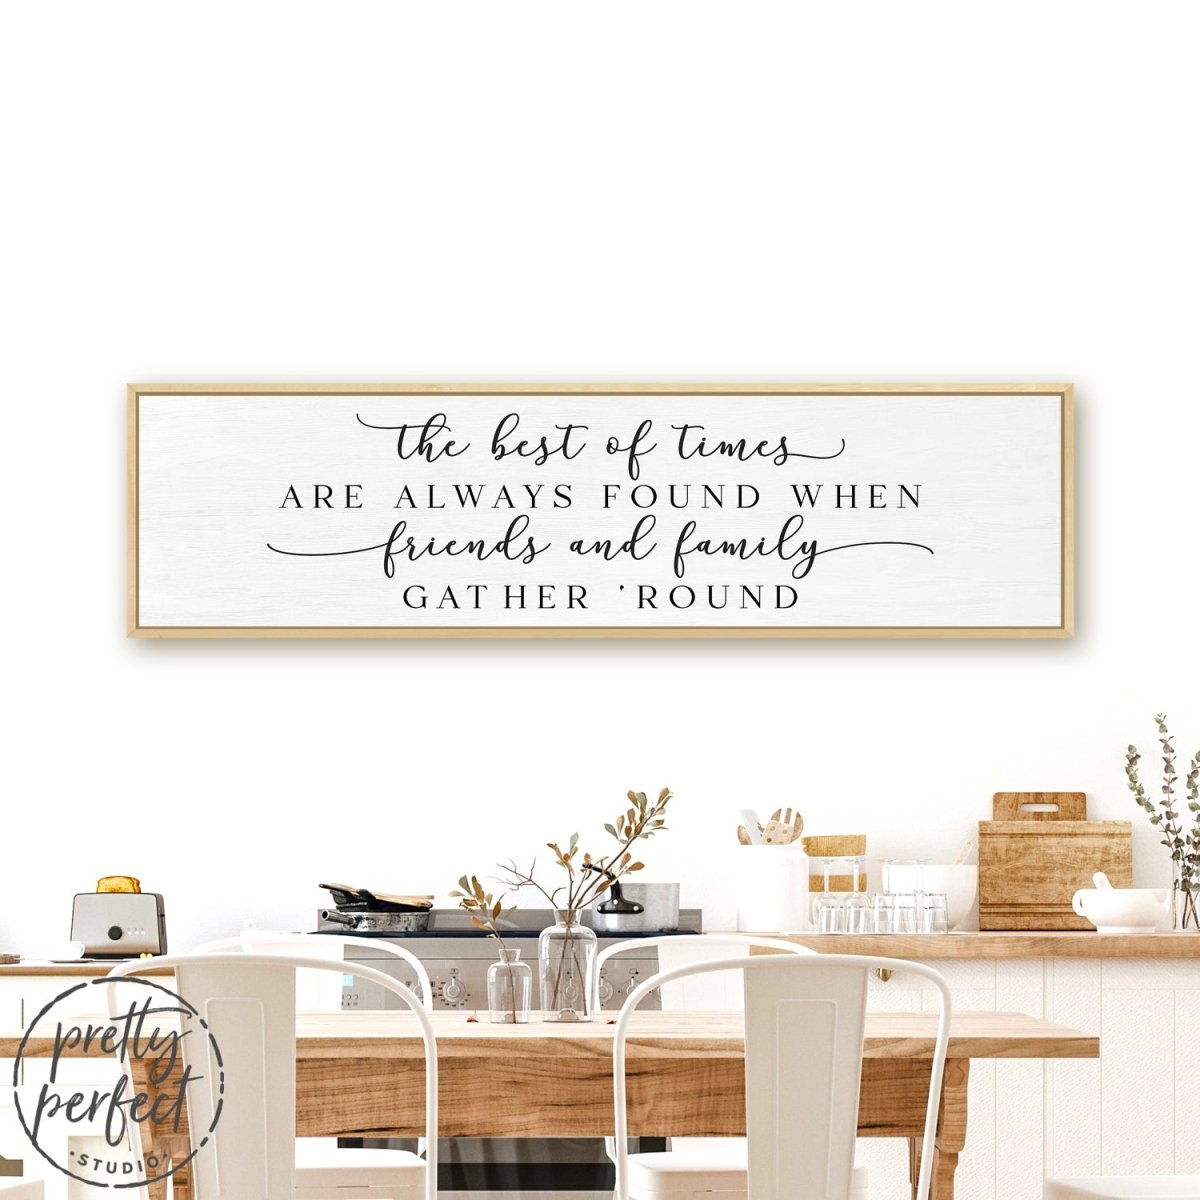 The Best Of Times Sign for Entryway - Pretty Perfect Studio